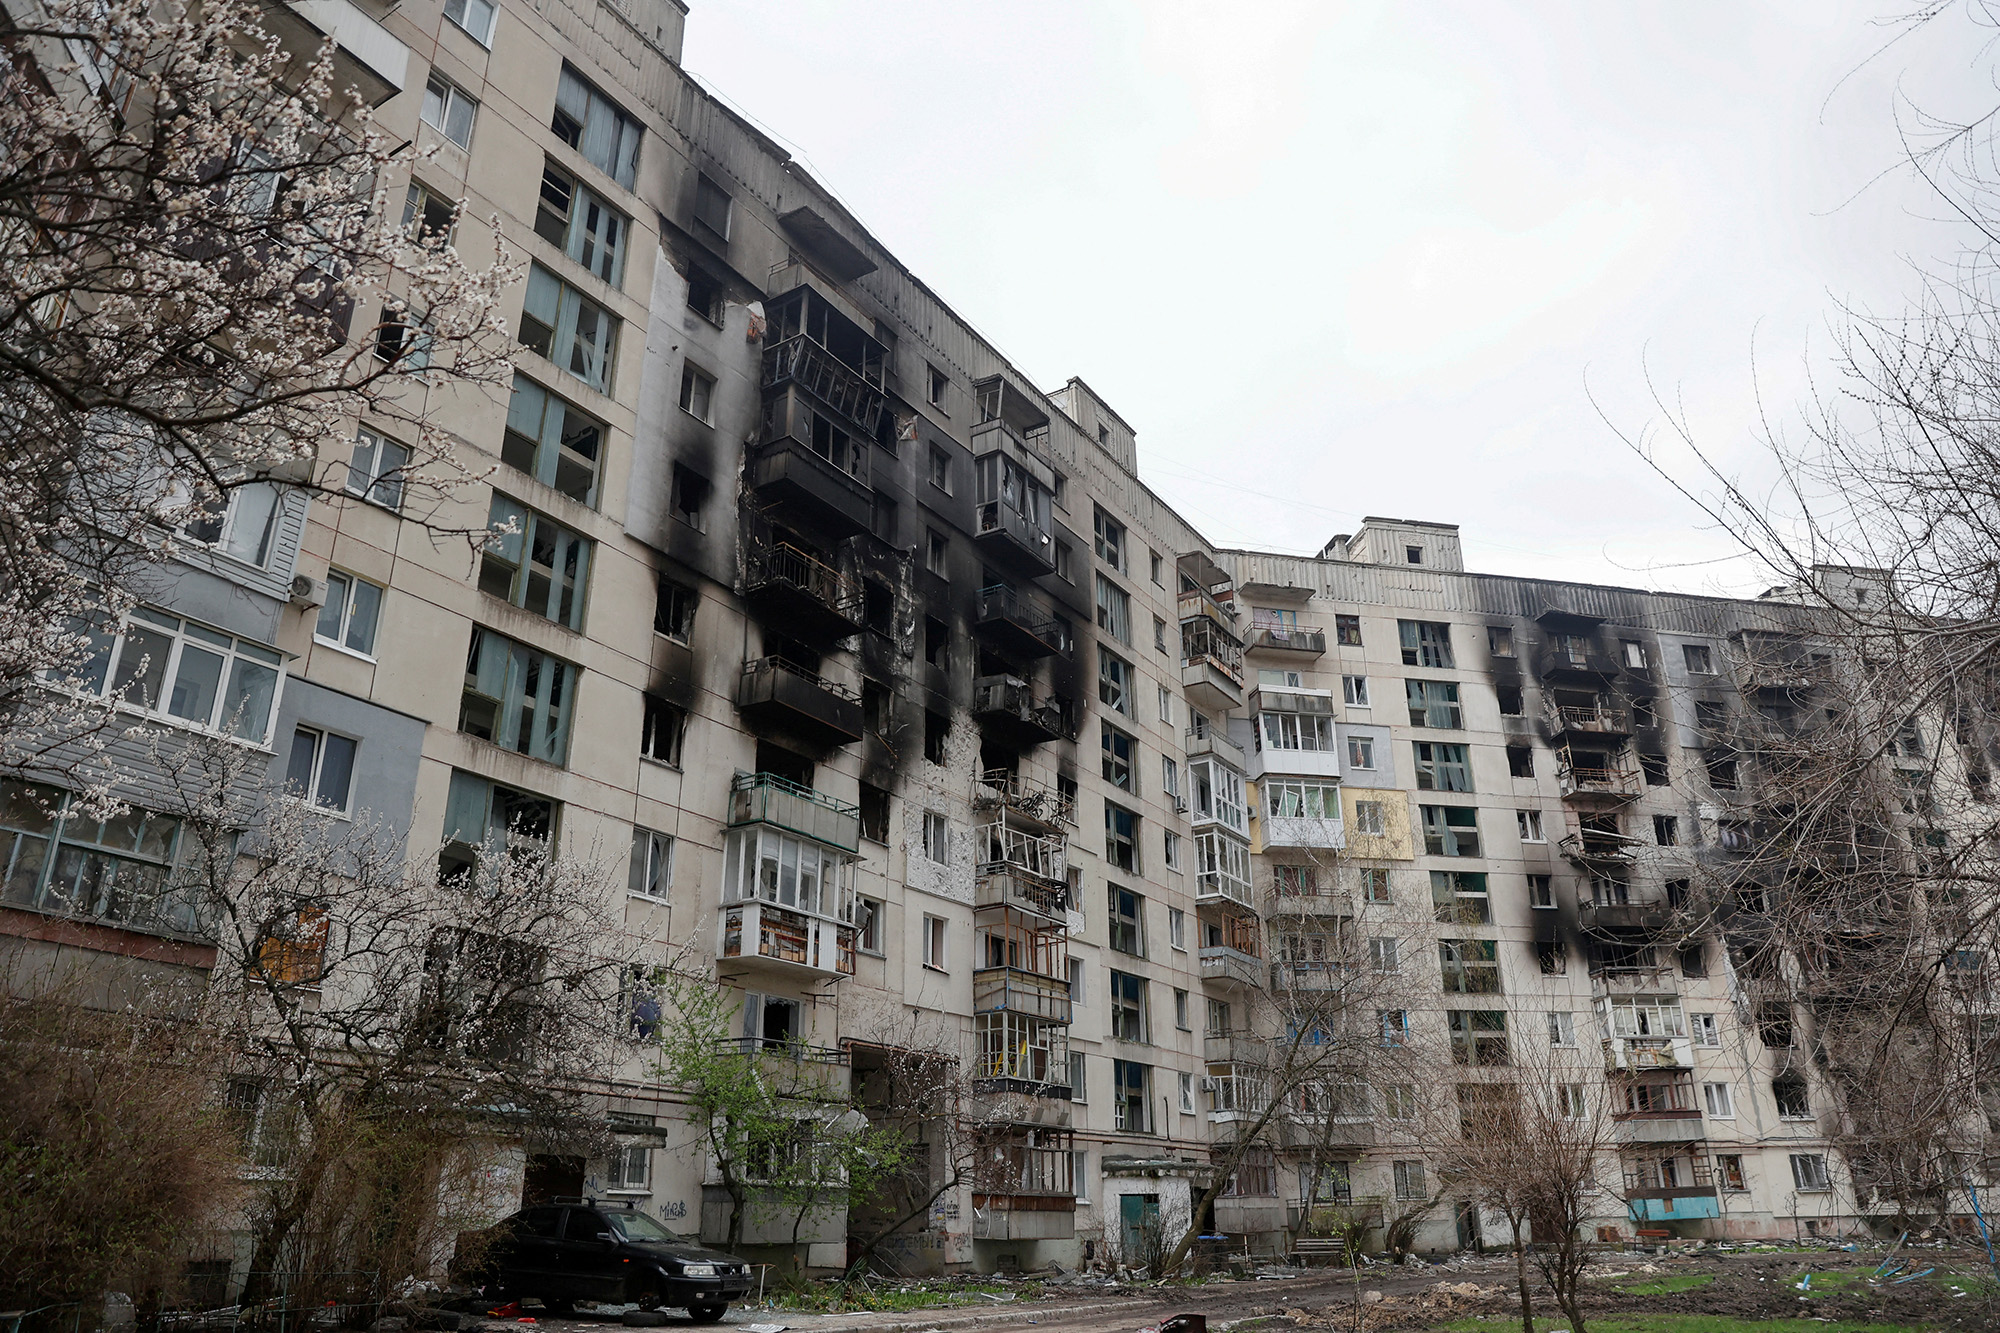 An apartment building damaged by a military strike in Sievierodonetsk, Luhansk region, Ukraine, on April 16.